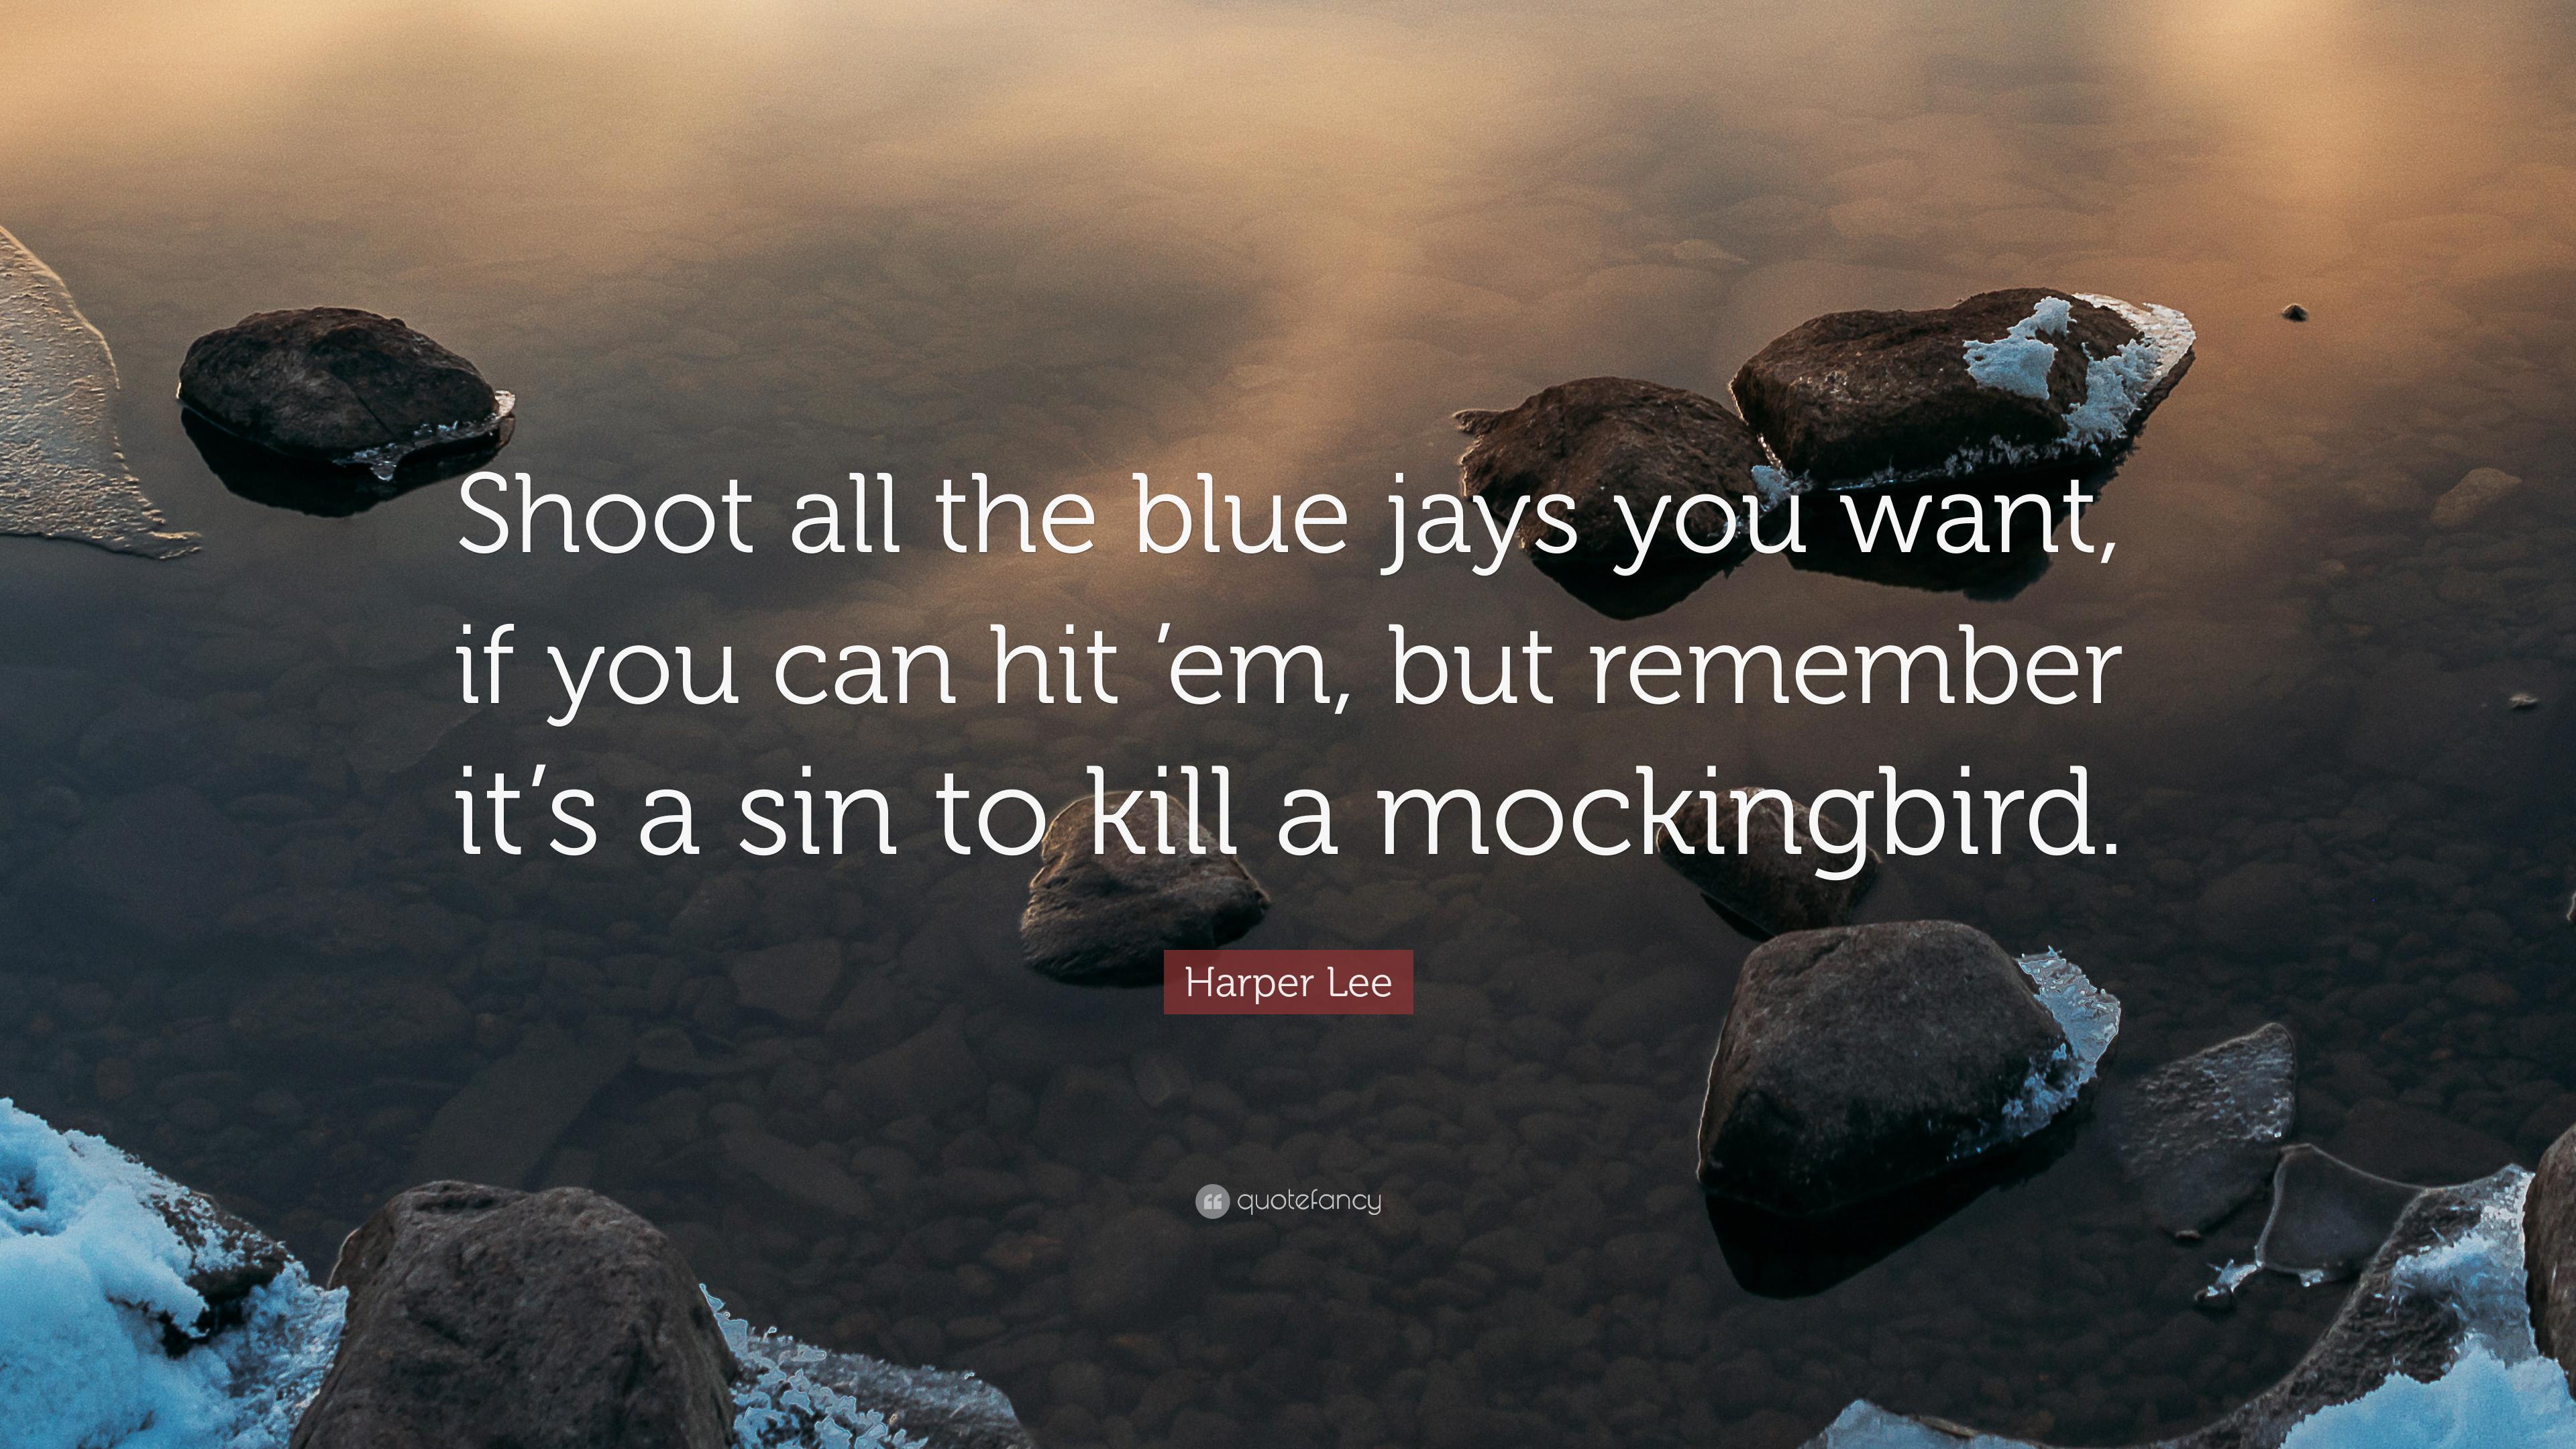 Harper Lee Quote: “Shoot all the blue jays you want, if you can hit